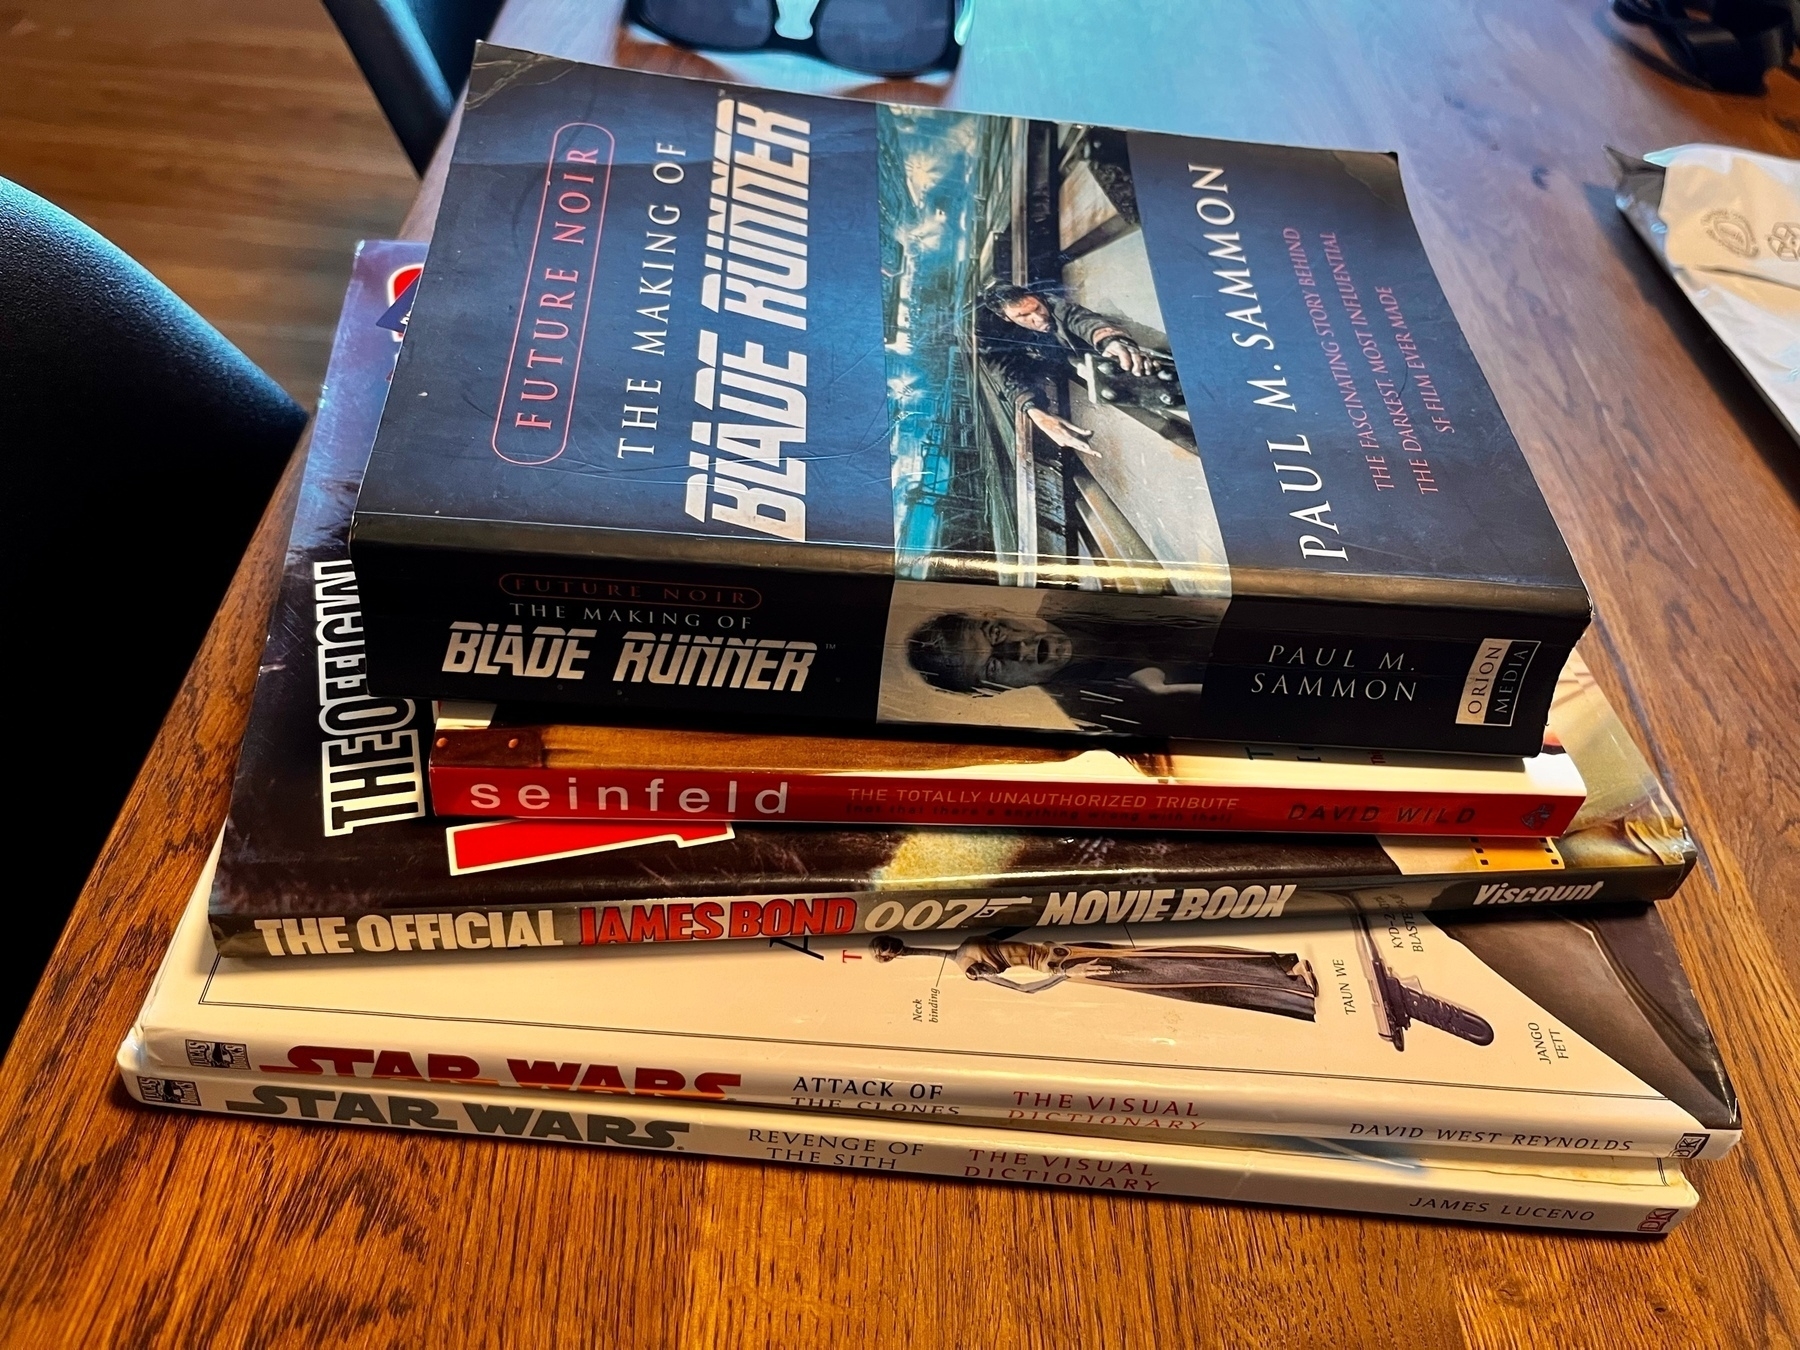 A stack of books on Star Wars, Blade Runner and 007